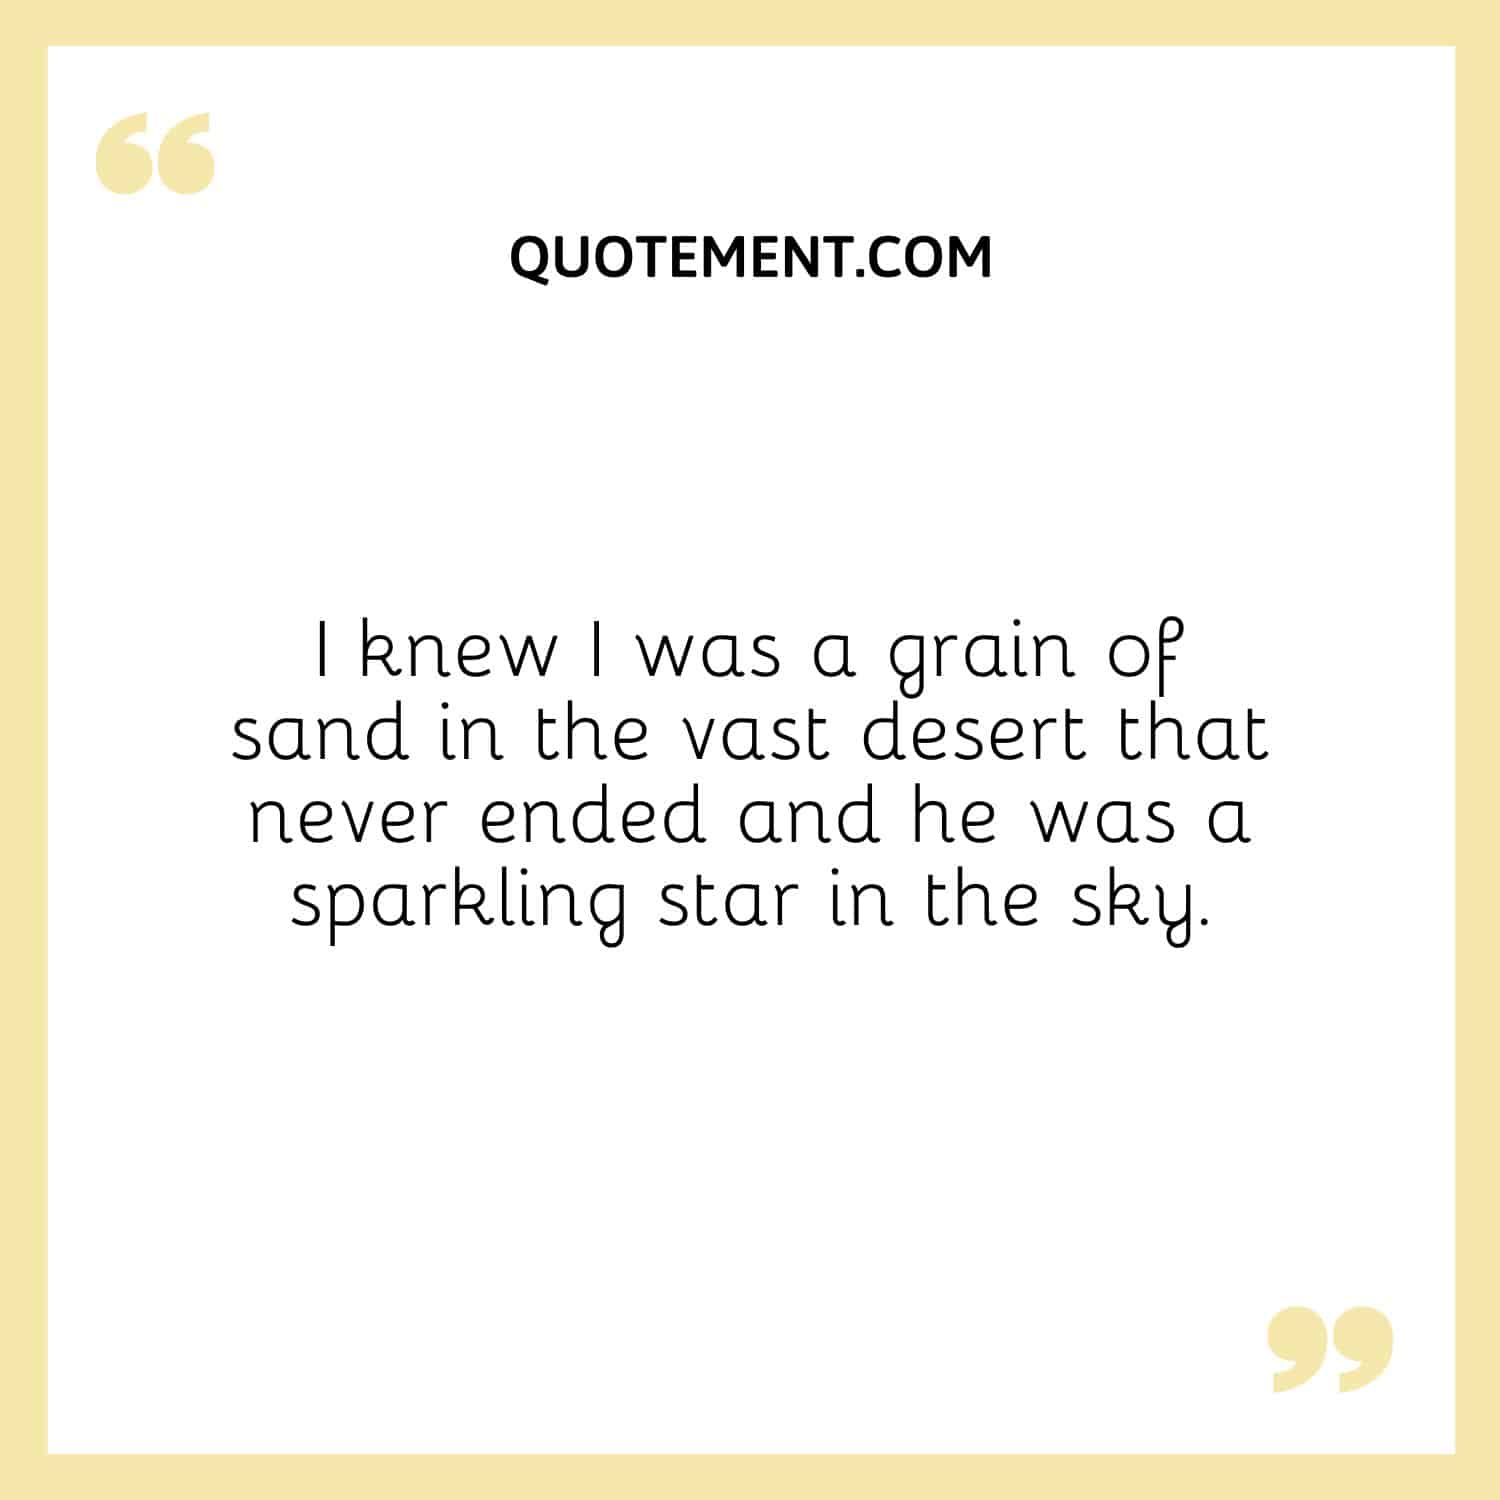 I knew I was a grain of sand in the vast desert that never ended and he was a sparkling star in the sky.